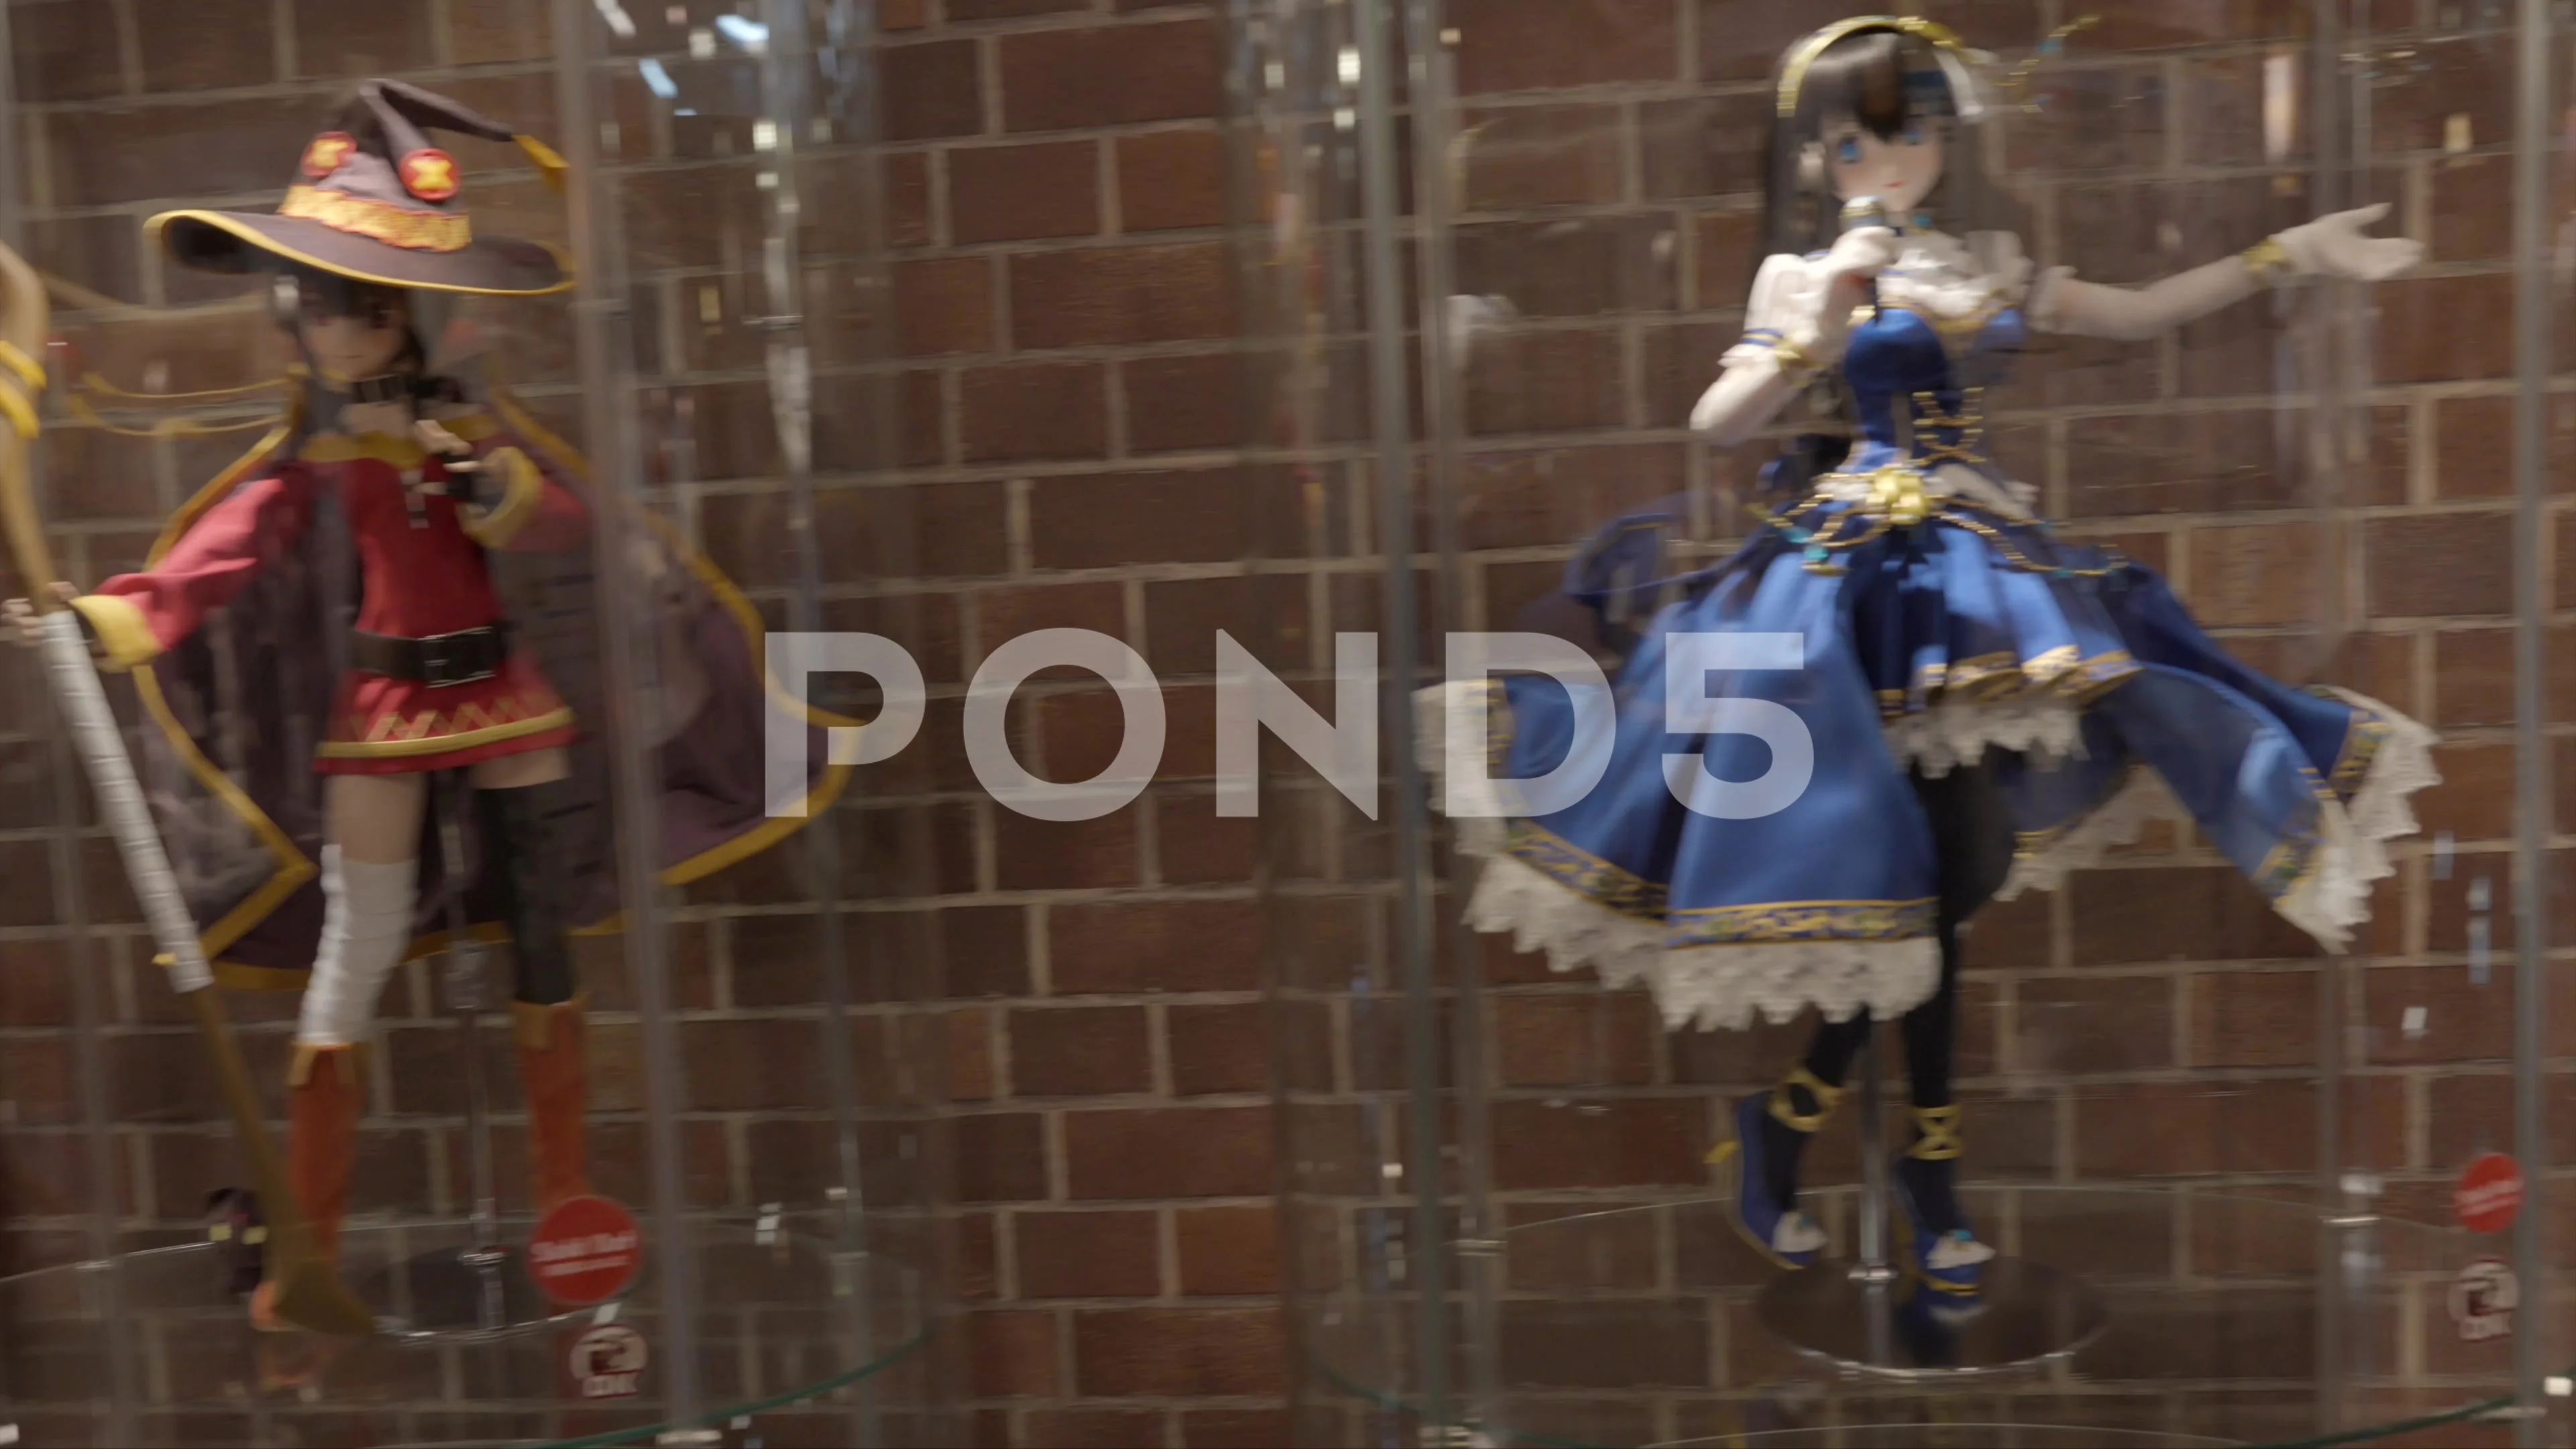 Where to buy cheap glass display case for Anime figurines? | HardwareZone  Forums